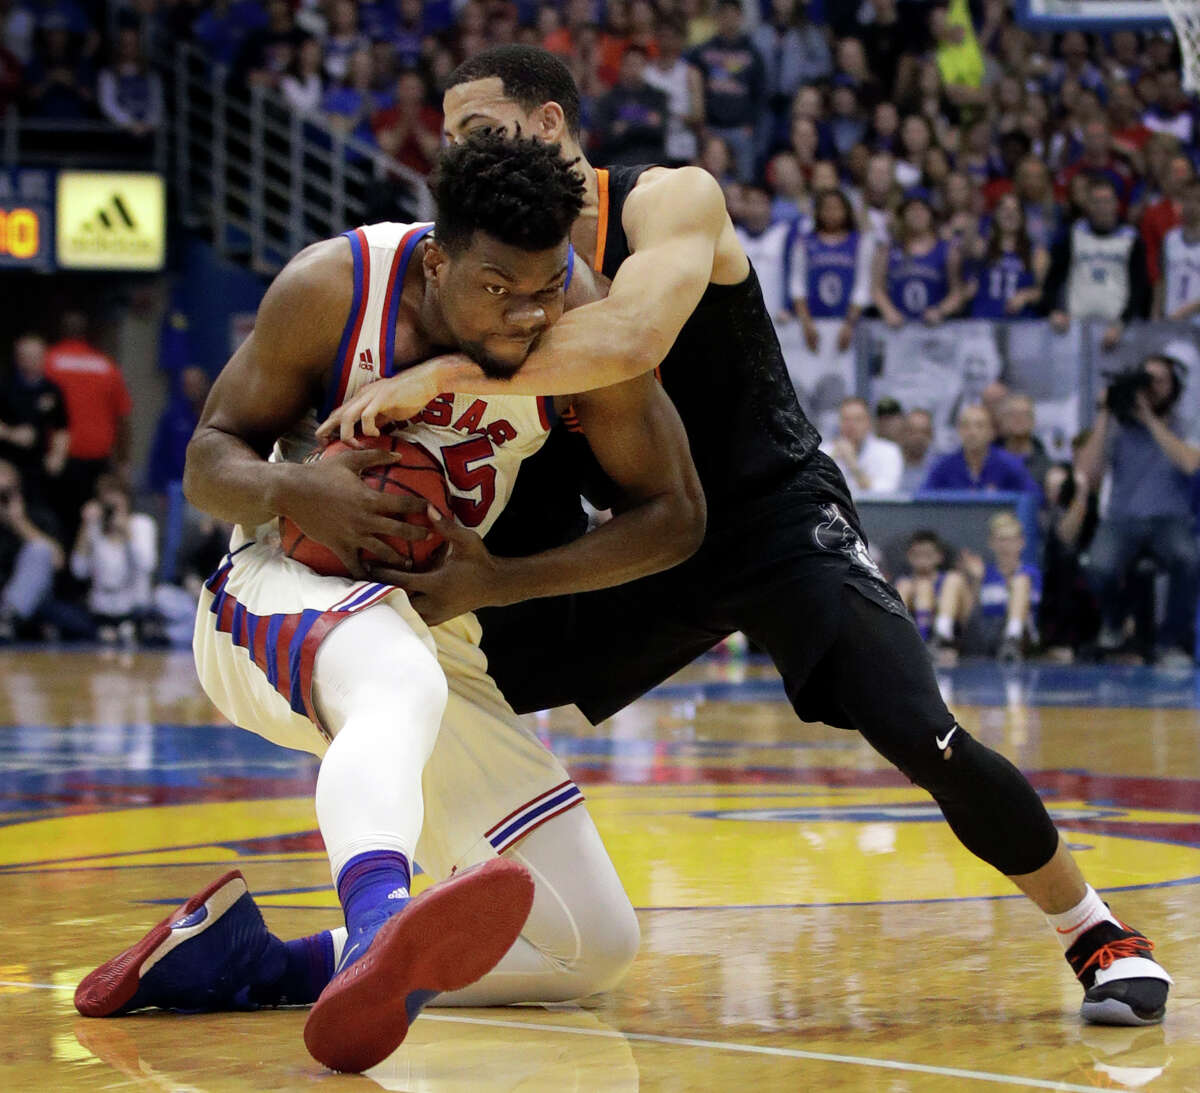 Kansas center Udoka Azubuike, left, is tied up by Oklahoma State guard Kendall Smith in the second half of Saturday's game at Lawrence, Kan. The Cowboys upset the No. 7 Jayhawks 84-79.